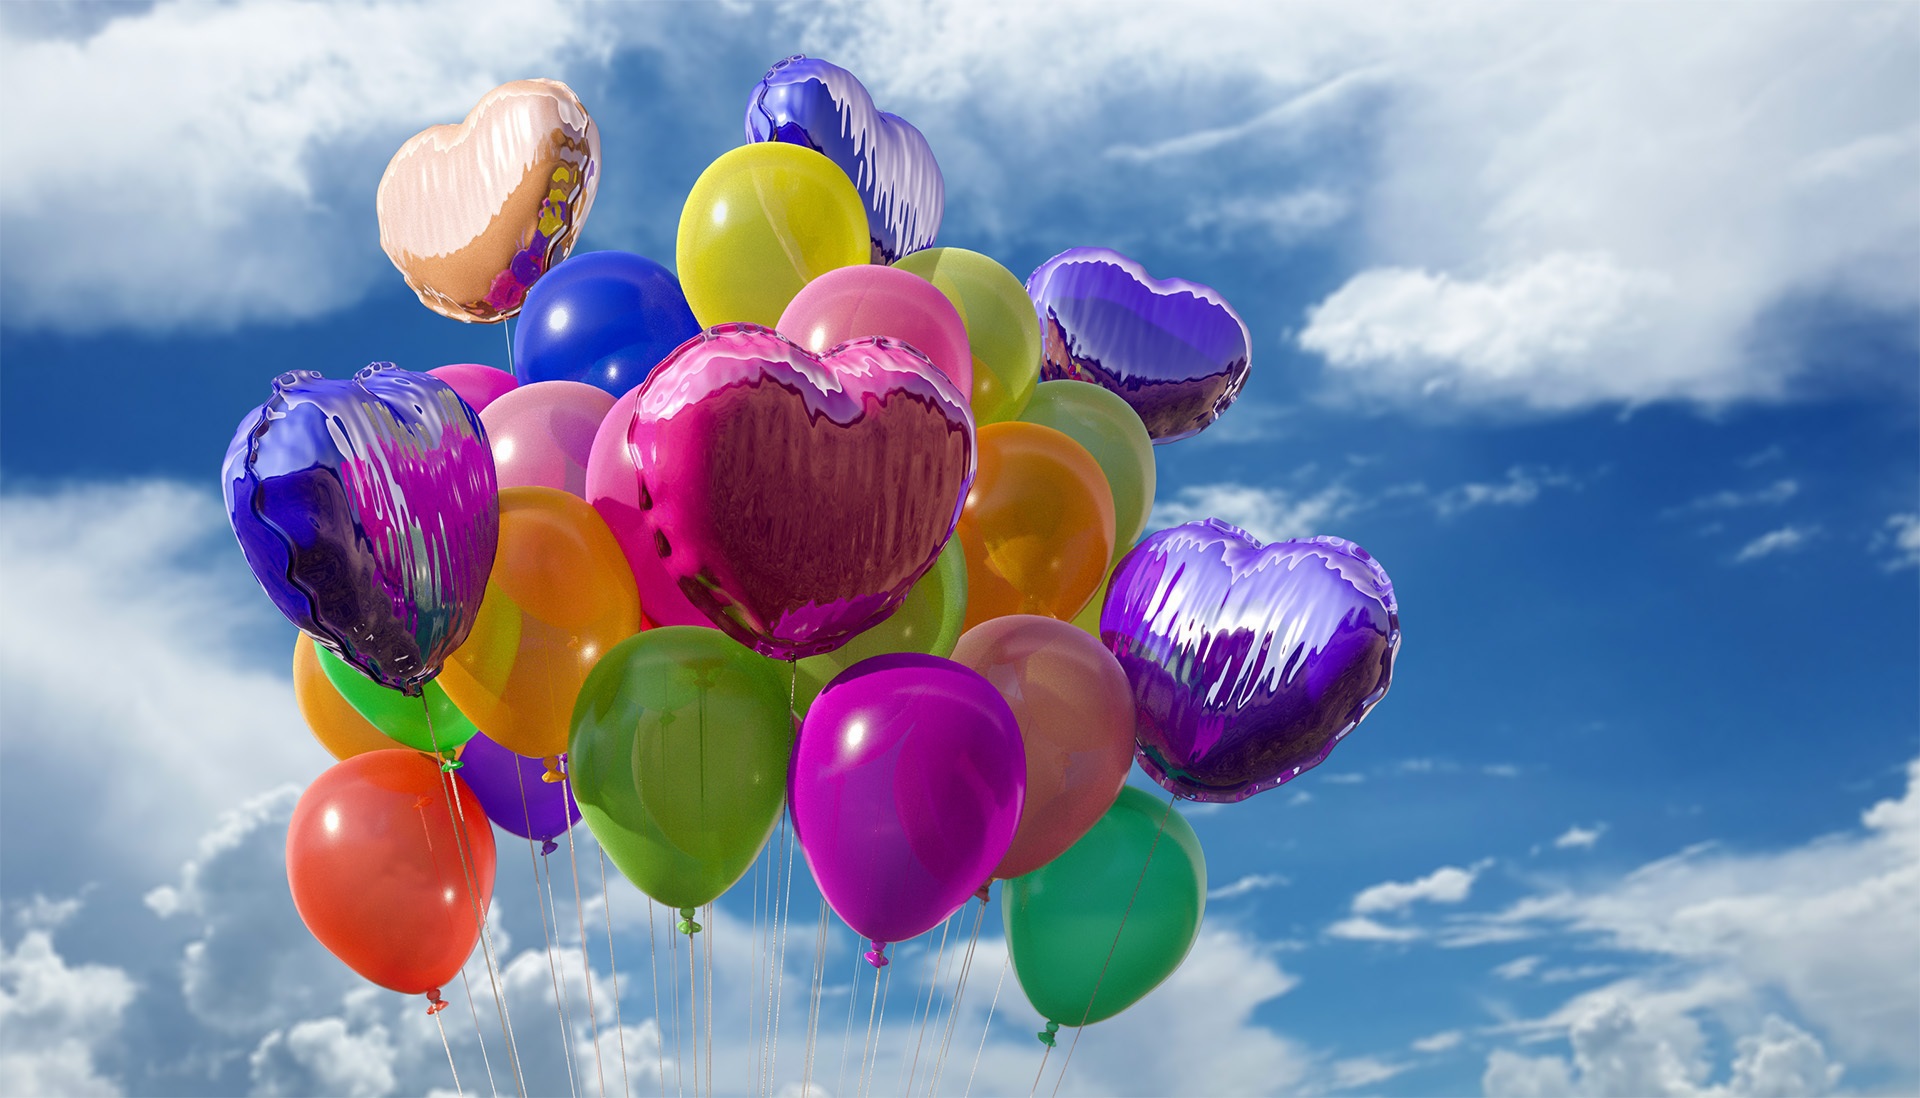 Balloon bouquet with clouds in background